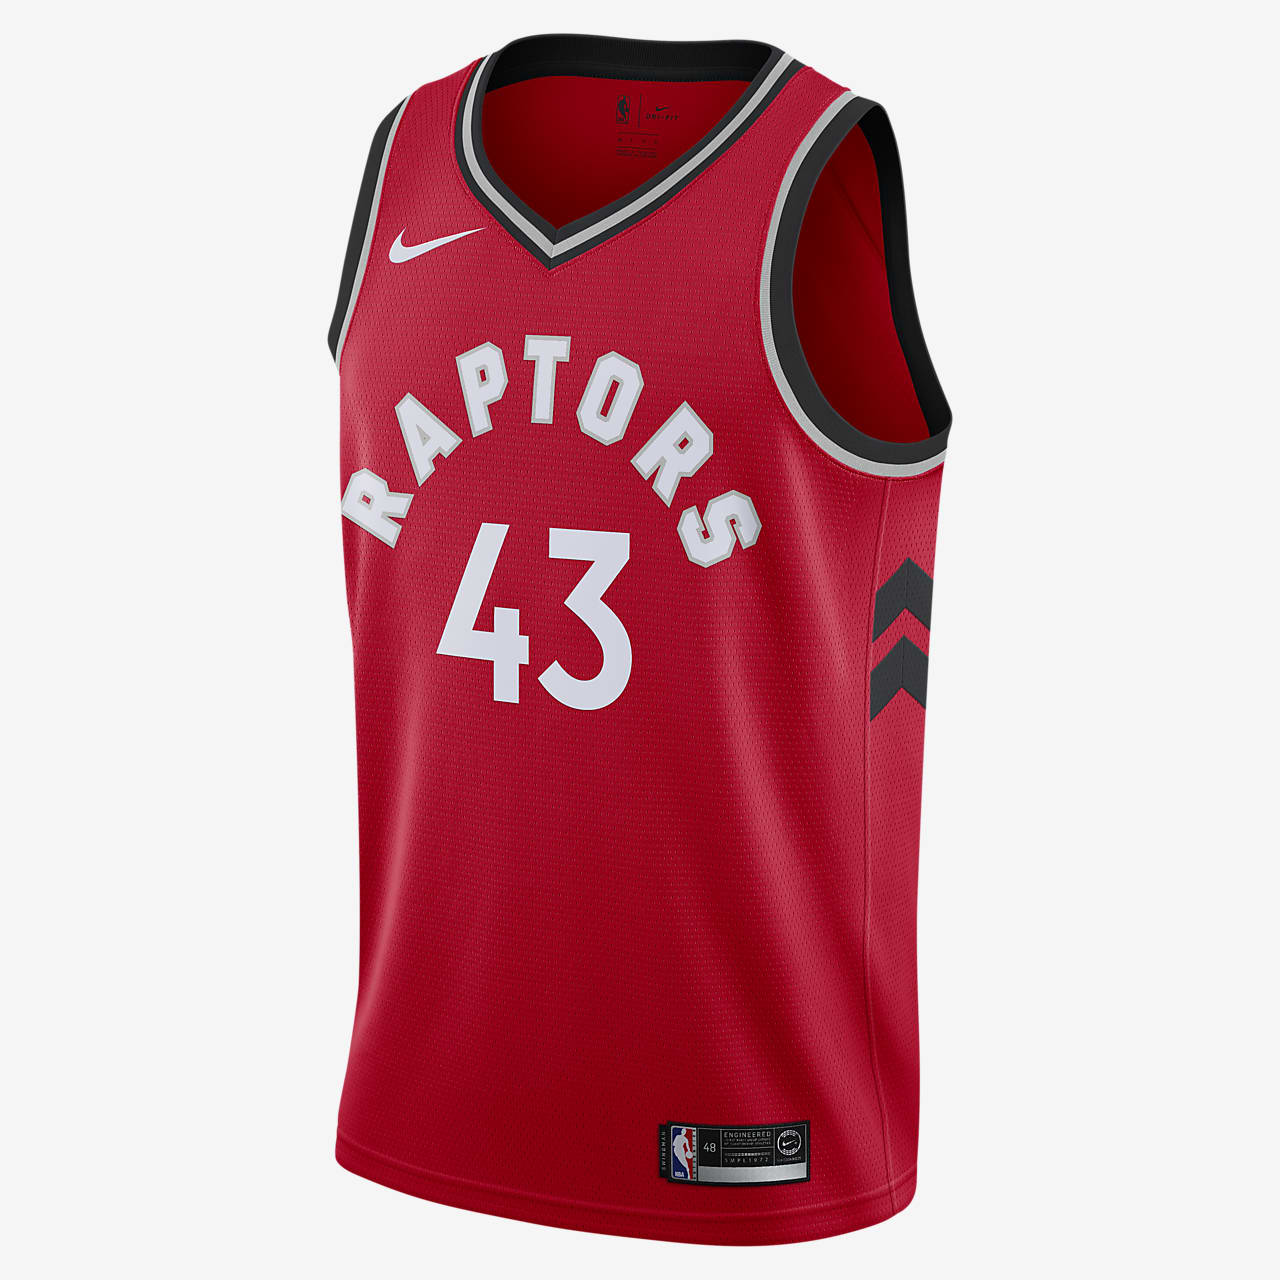 pascal siakam jersey number